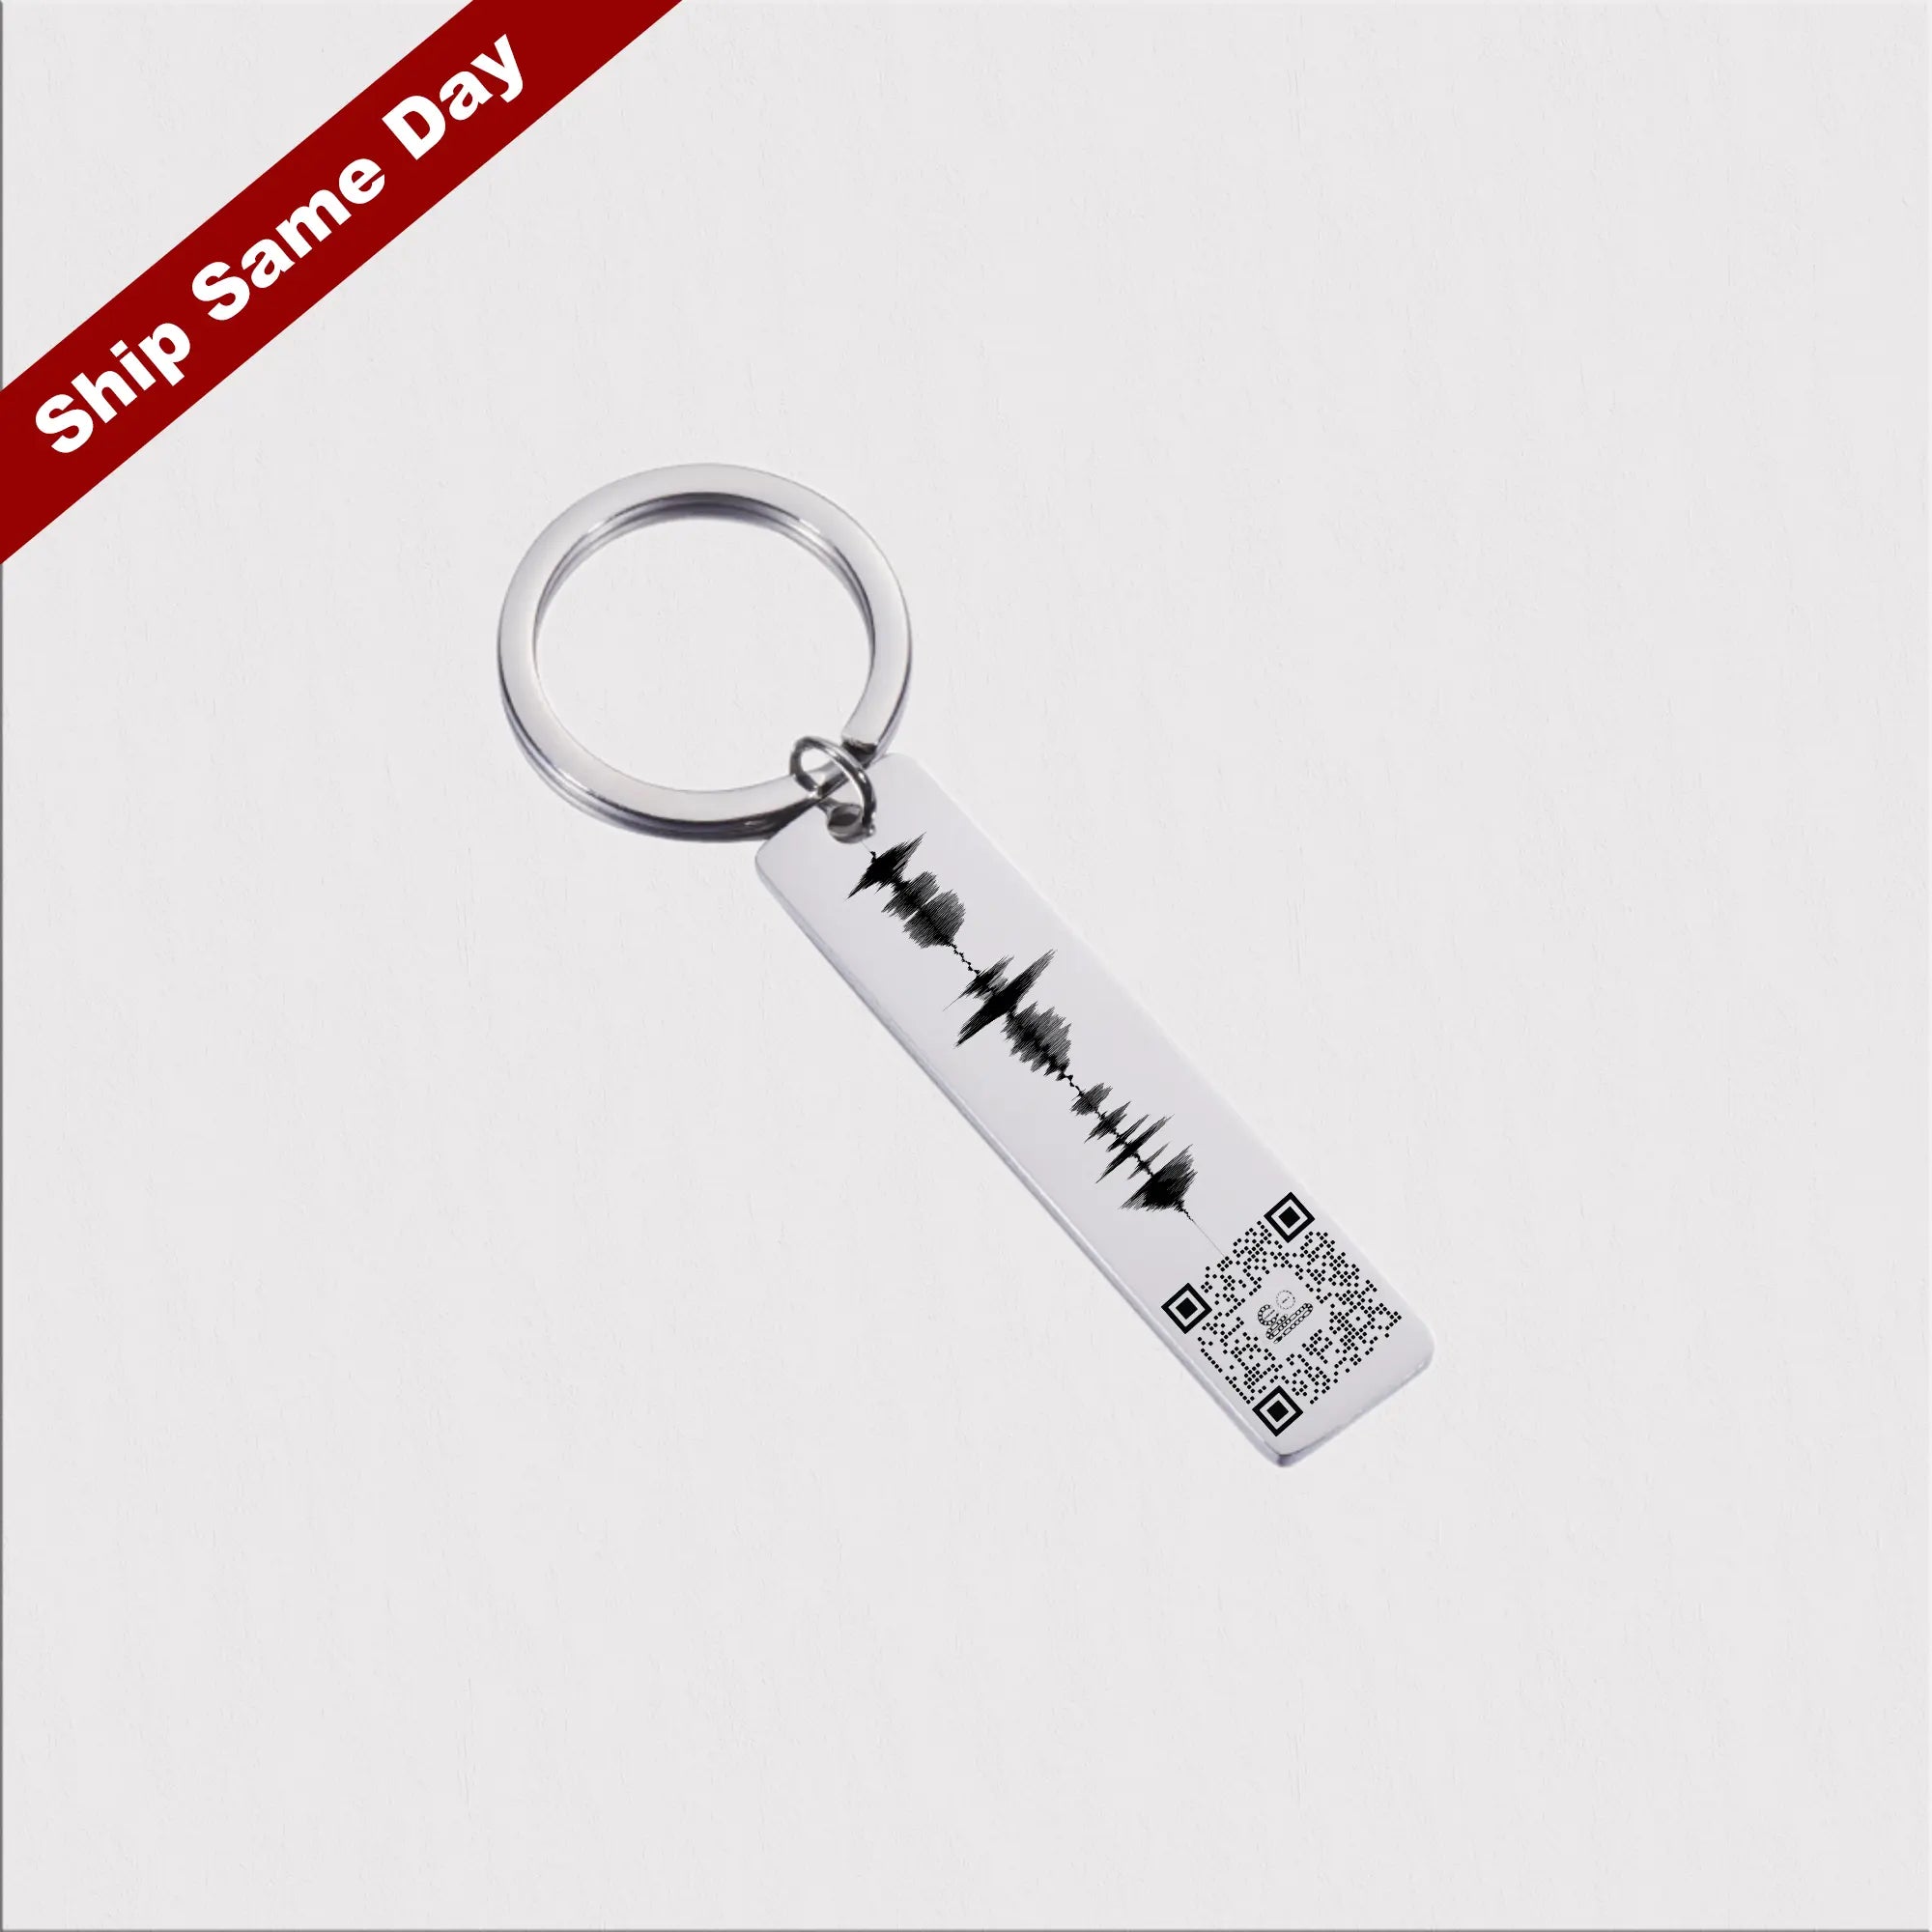 Engraved Keychain, Voice Message Keyring